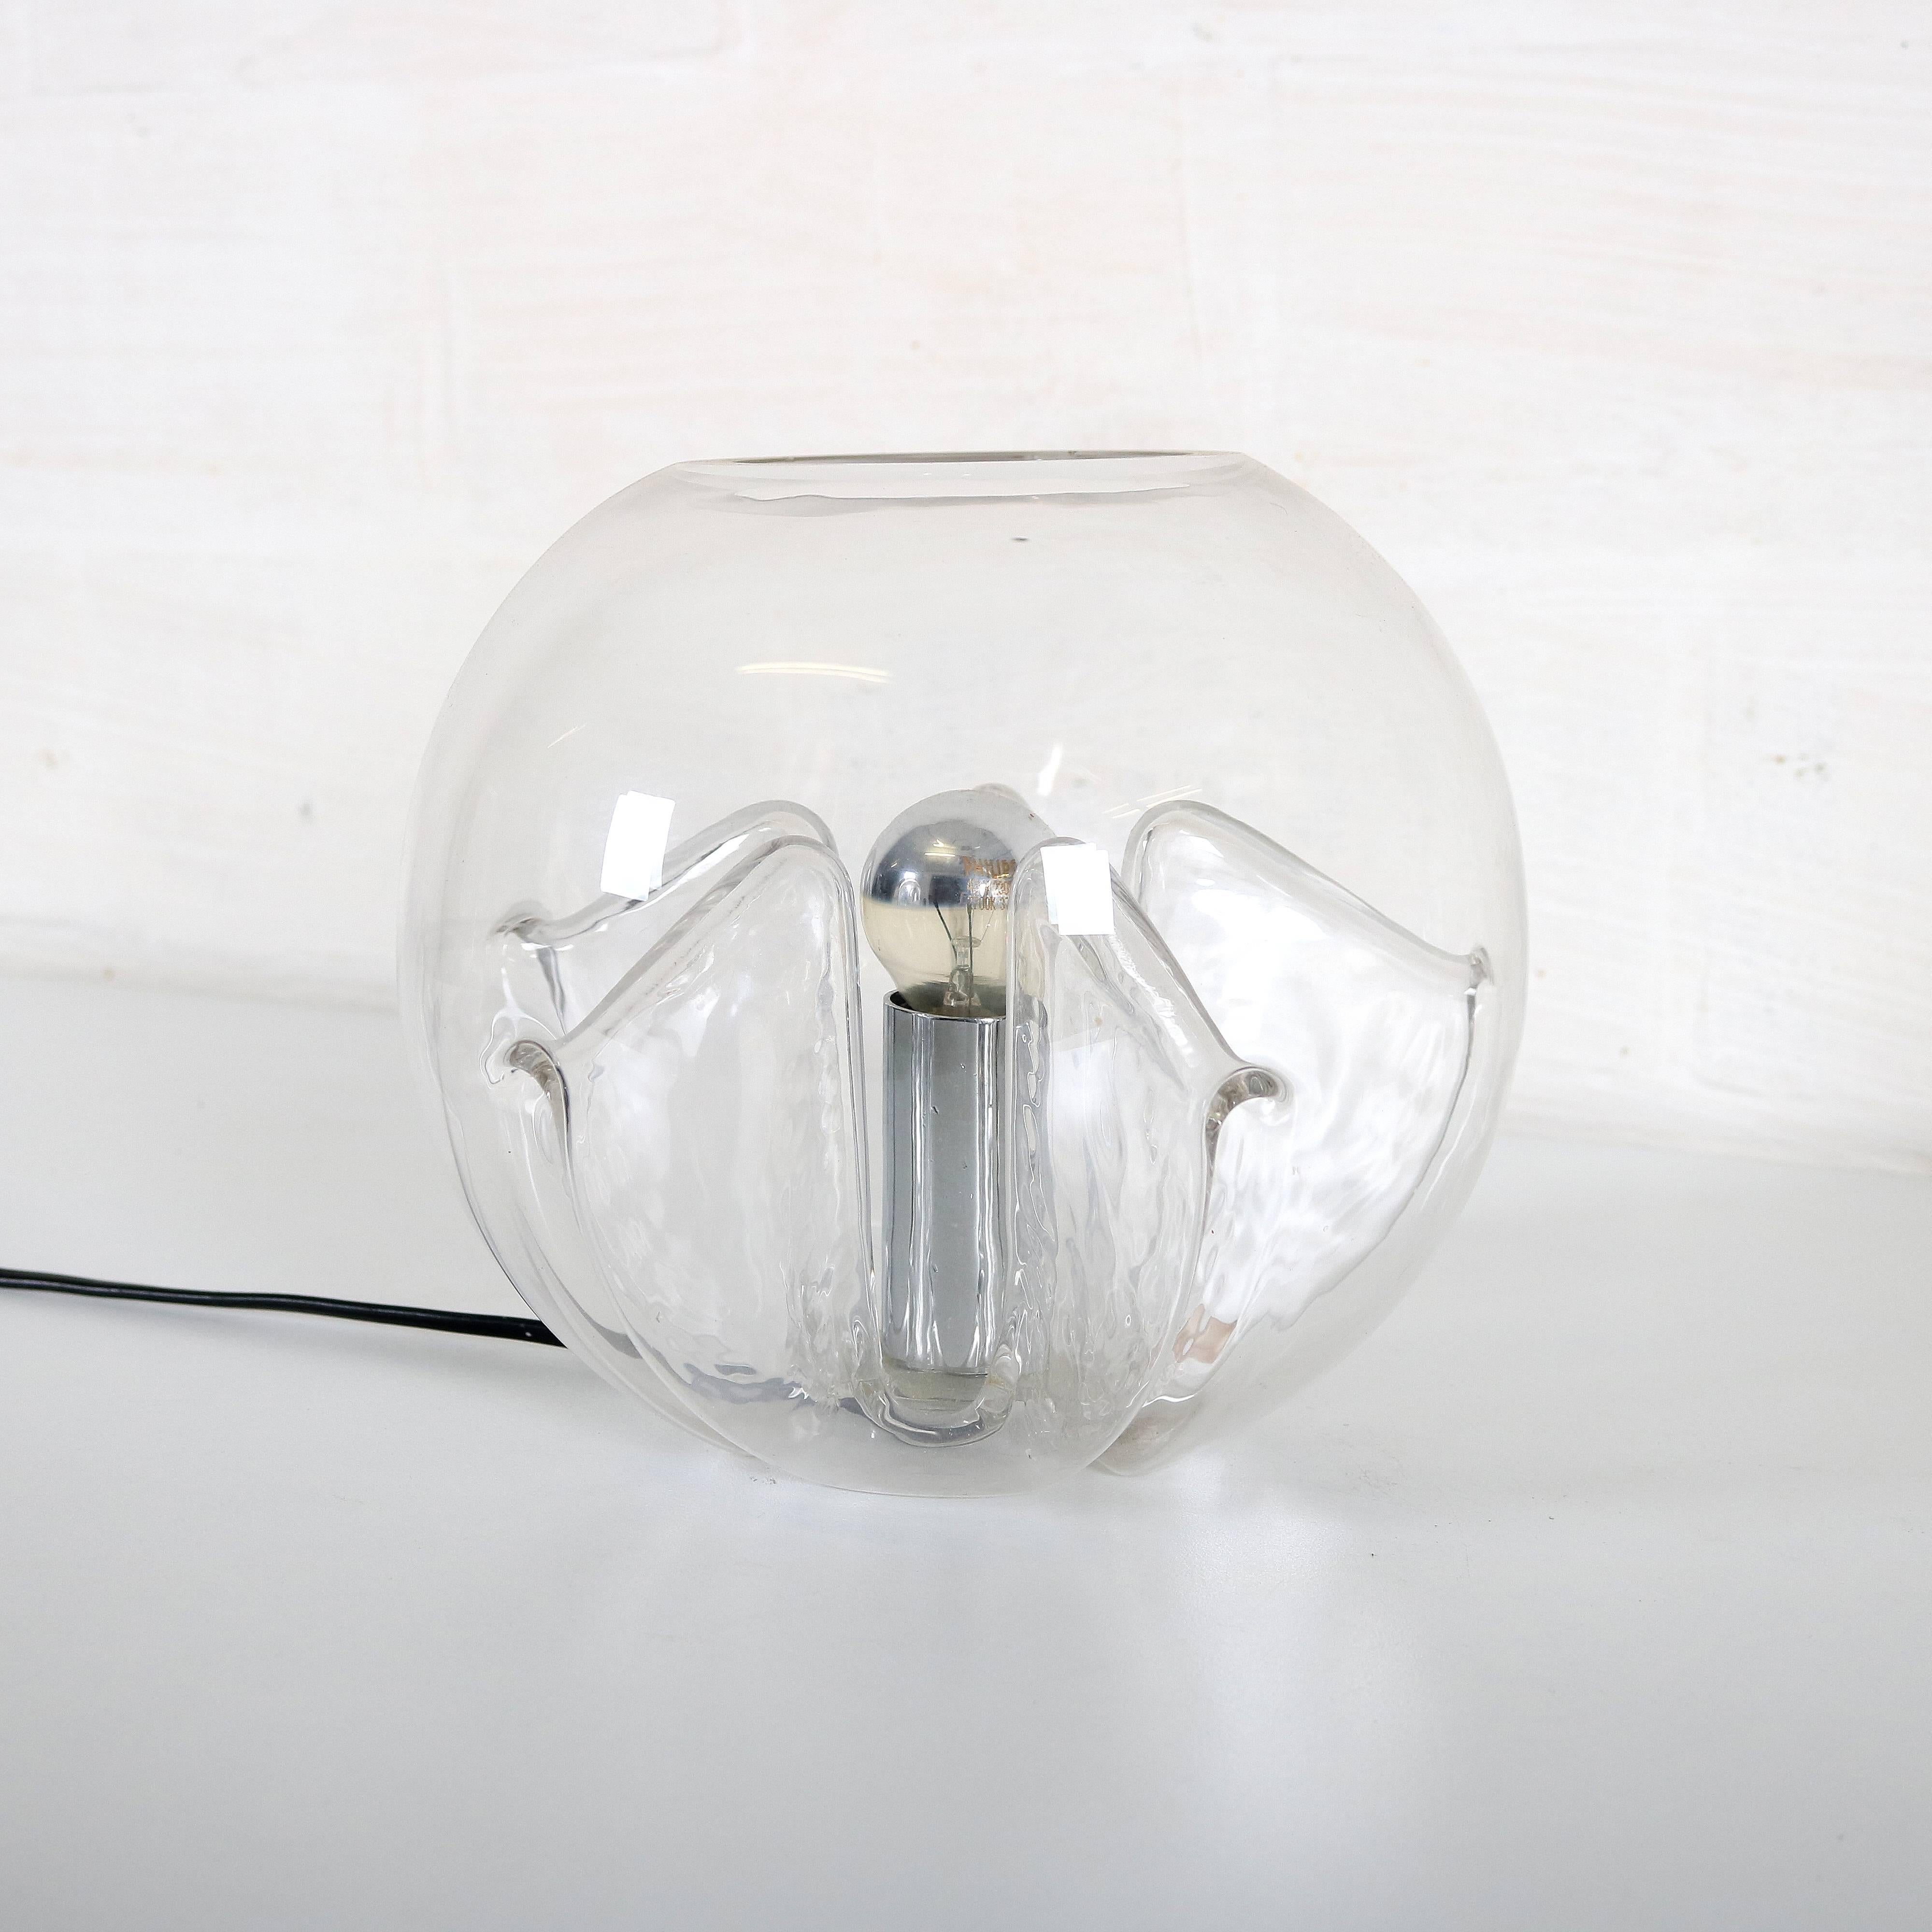 "Nuphar" lamp designed by Toni Zuccheri for VeArt.
Only minor users damage.